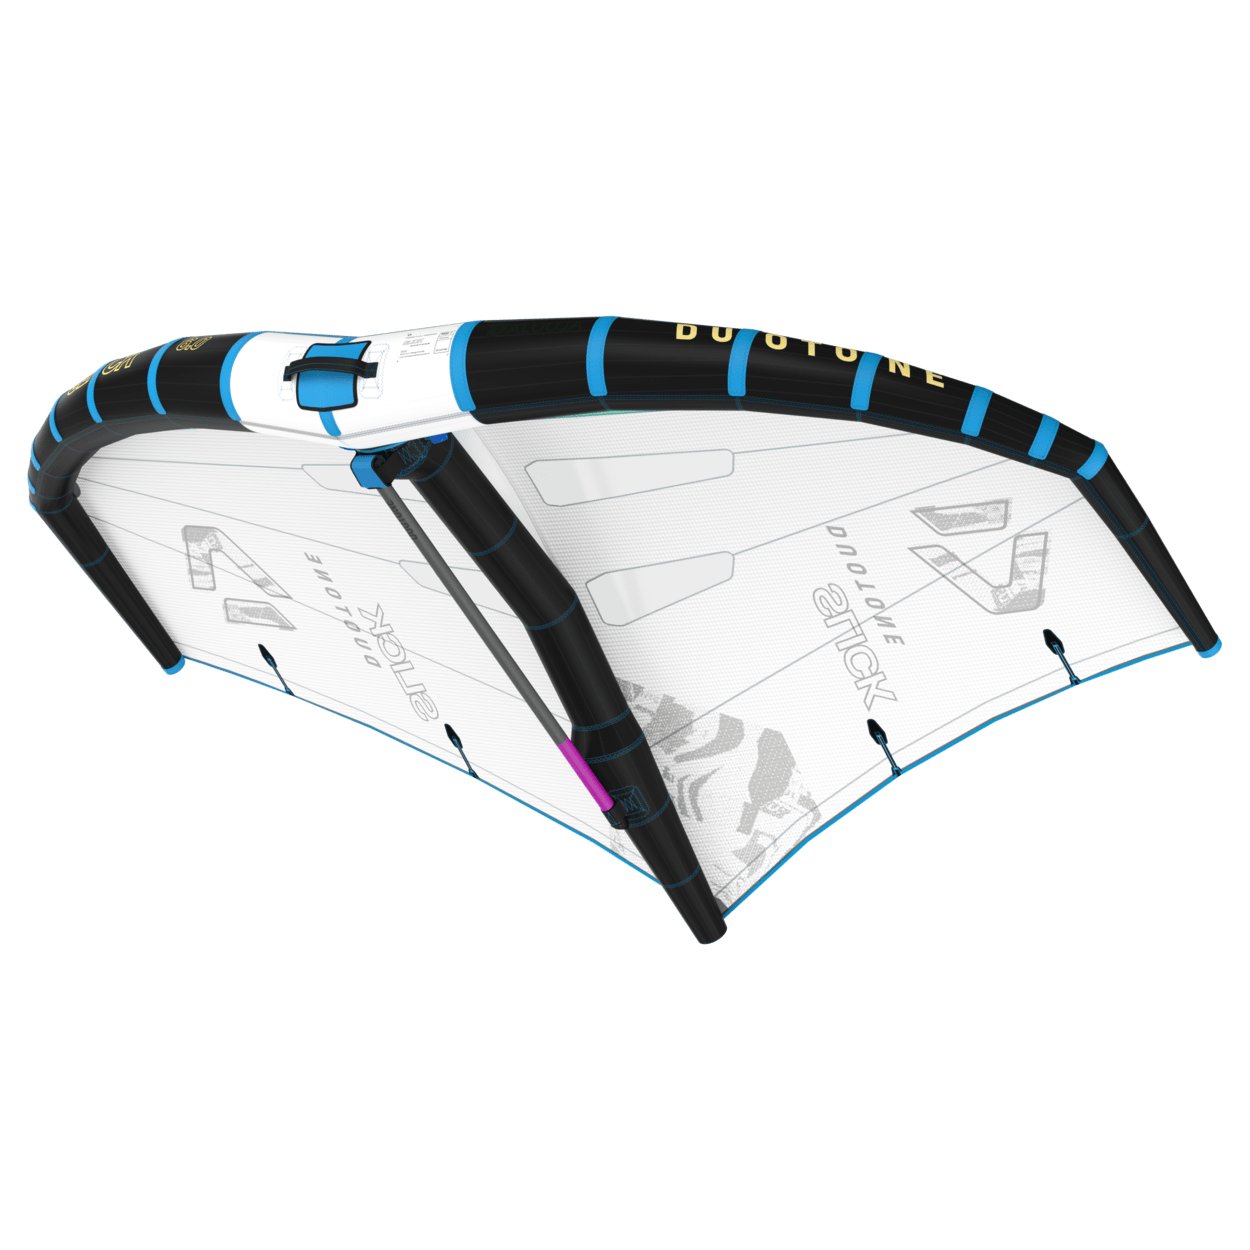 Duotone Foil Wing Slick 2023 - Worthing Watersports - 9010583175386 - Foil Wing Slick CN - Duotone X